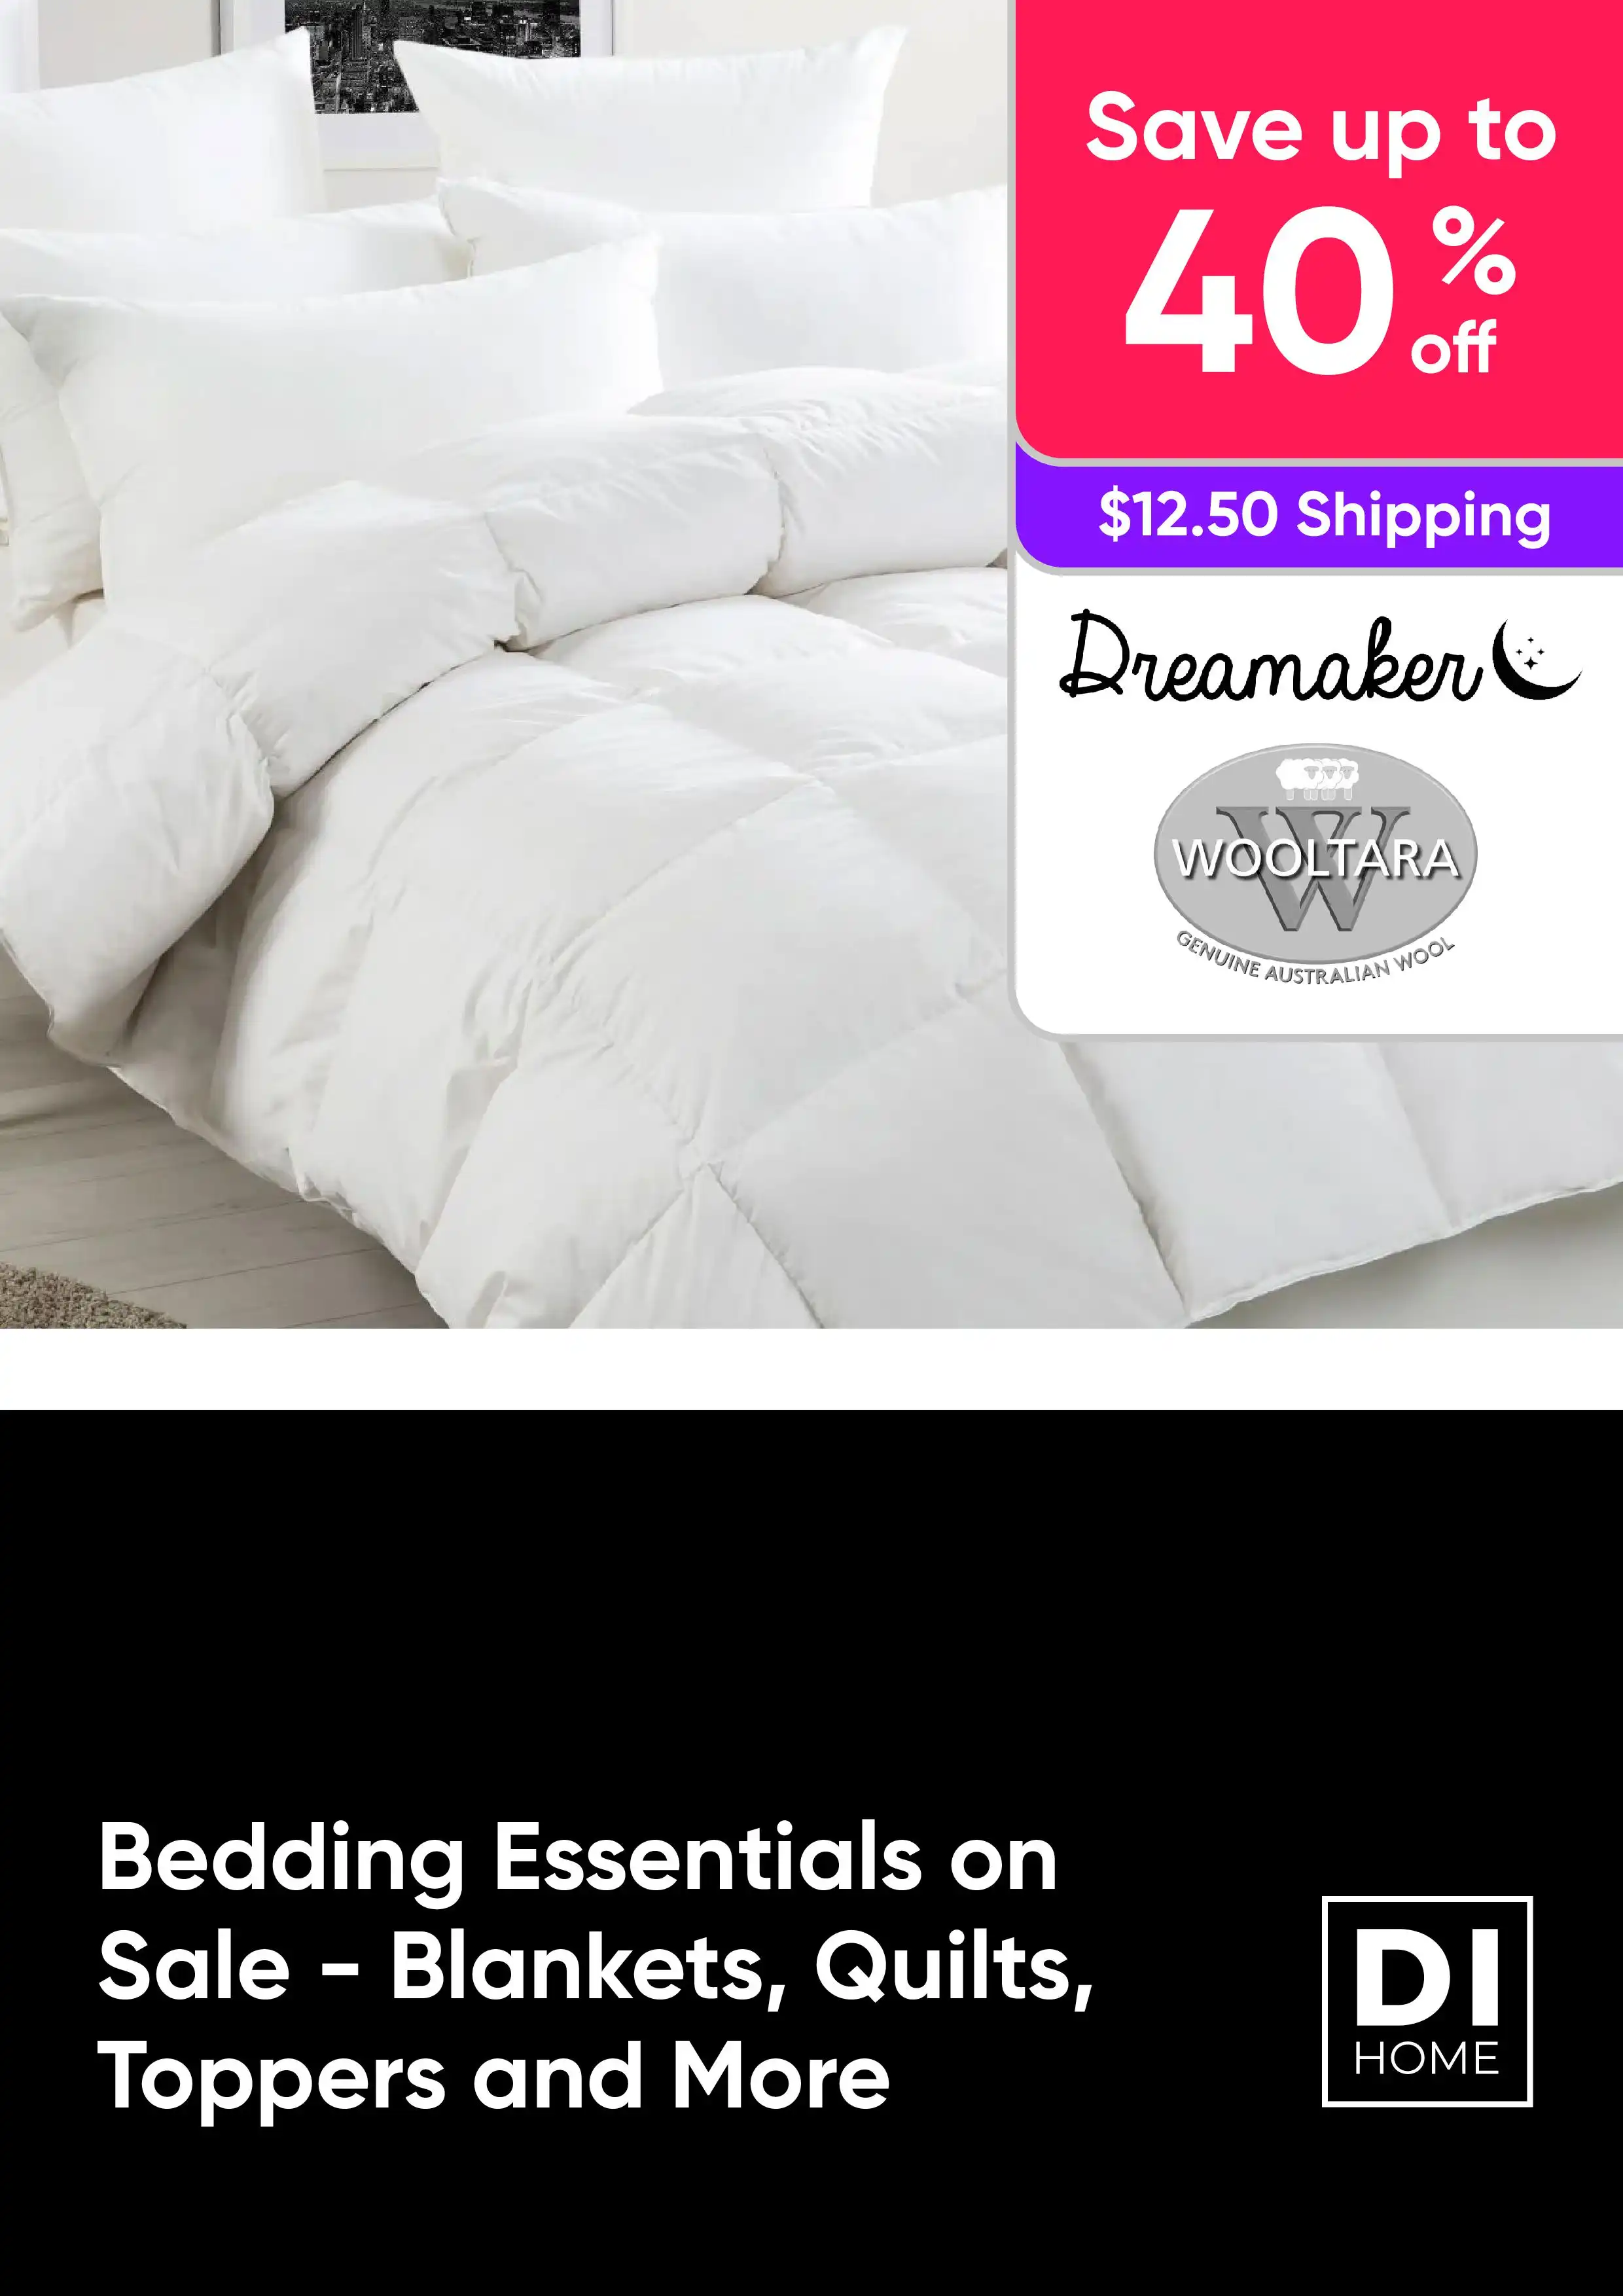 Bedding Essentials on Sale - Blankets, Quilts, Toppers and More - Save up to 40% off